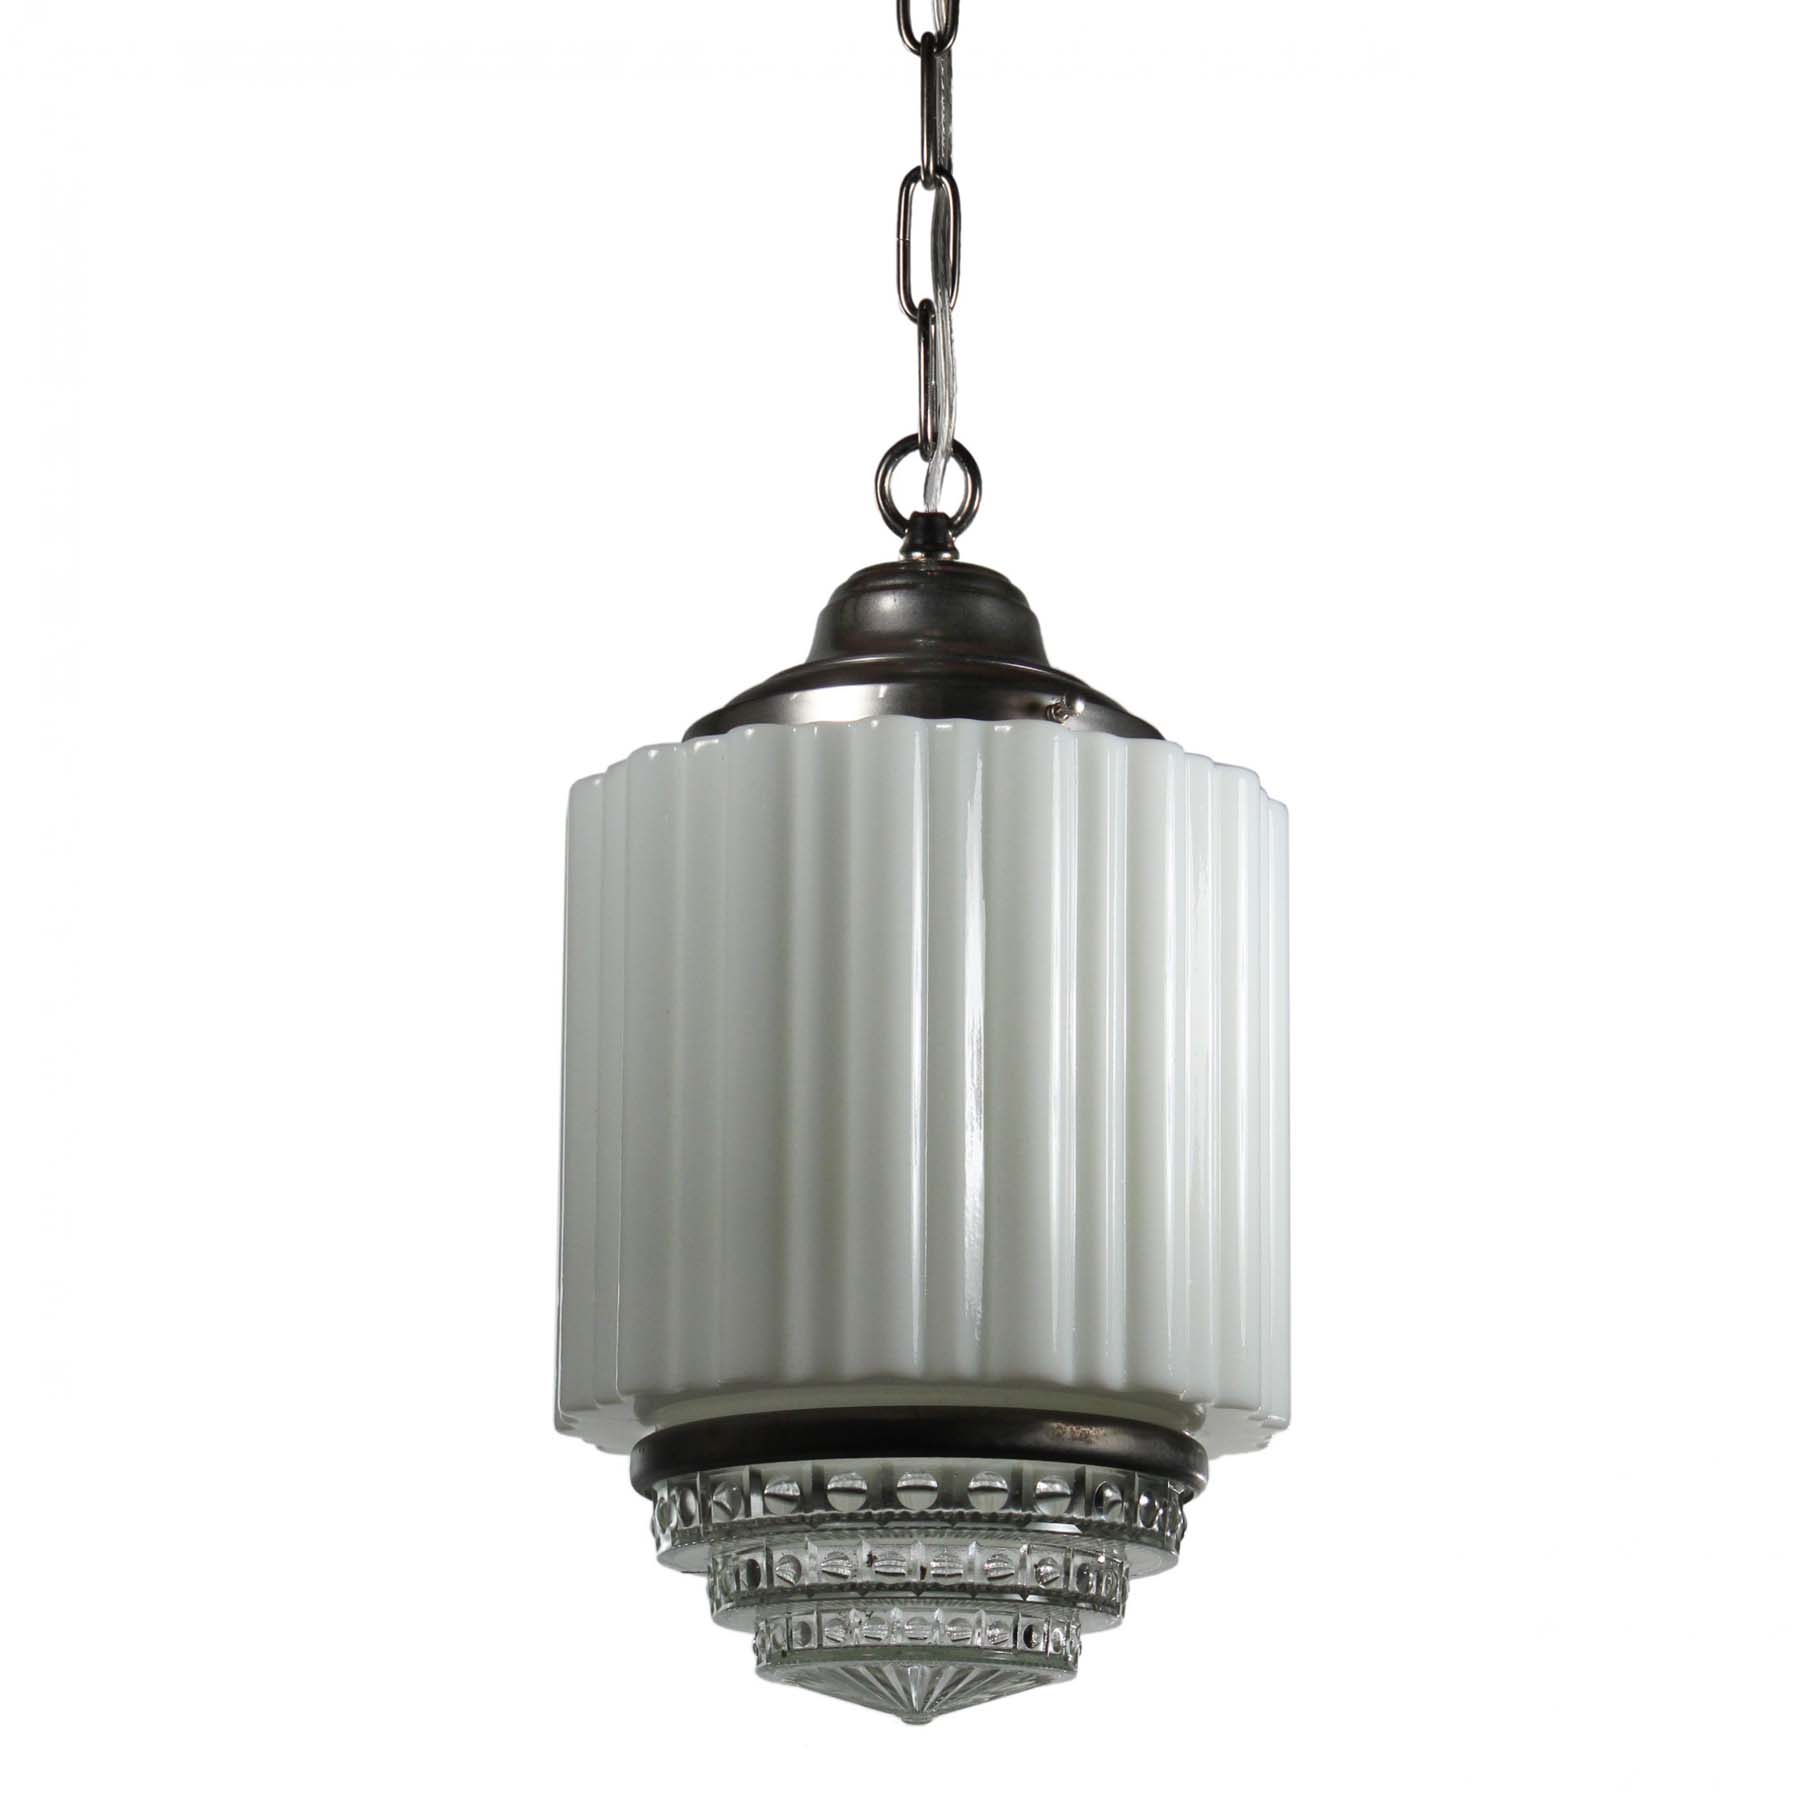 SOLD Art Deco Skyscraper Pendant with Two-Part Prismatic Shade, Antique Lighting-0